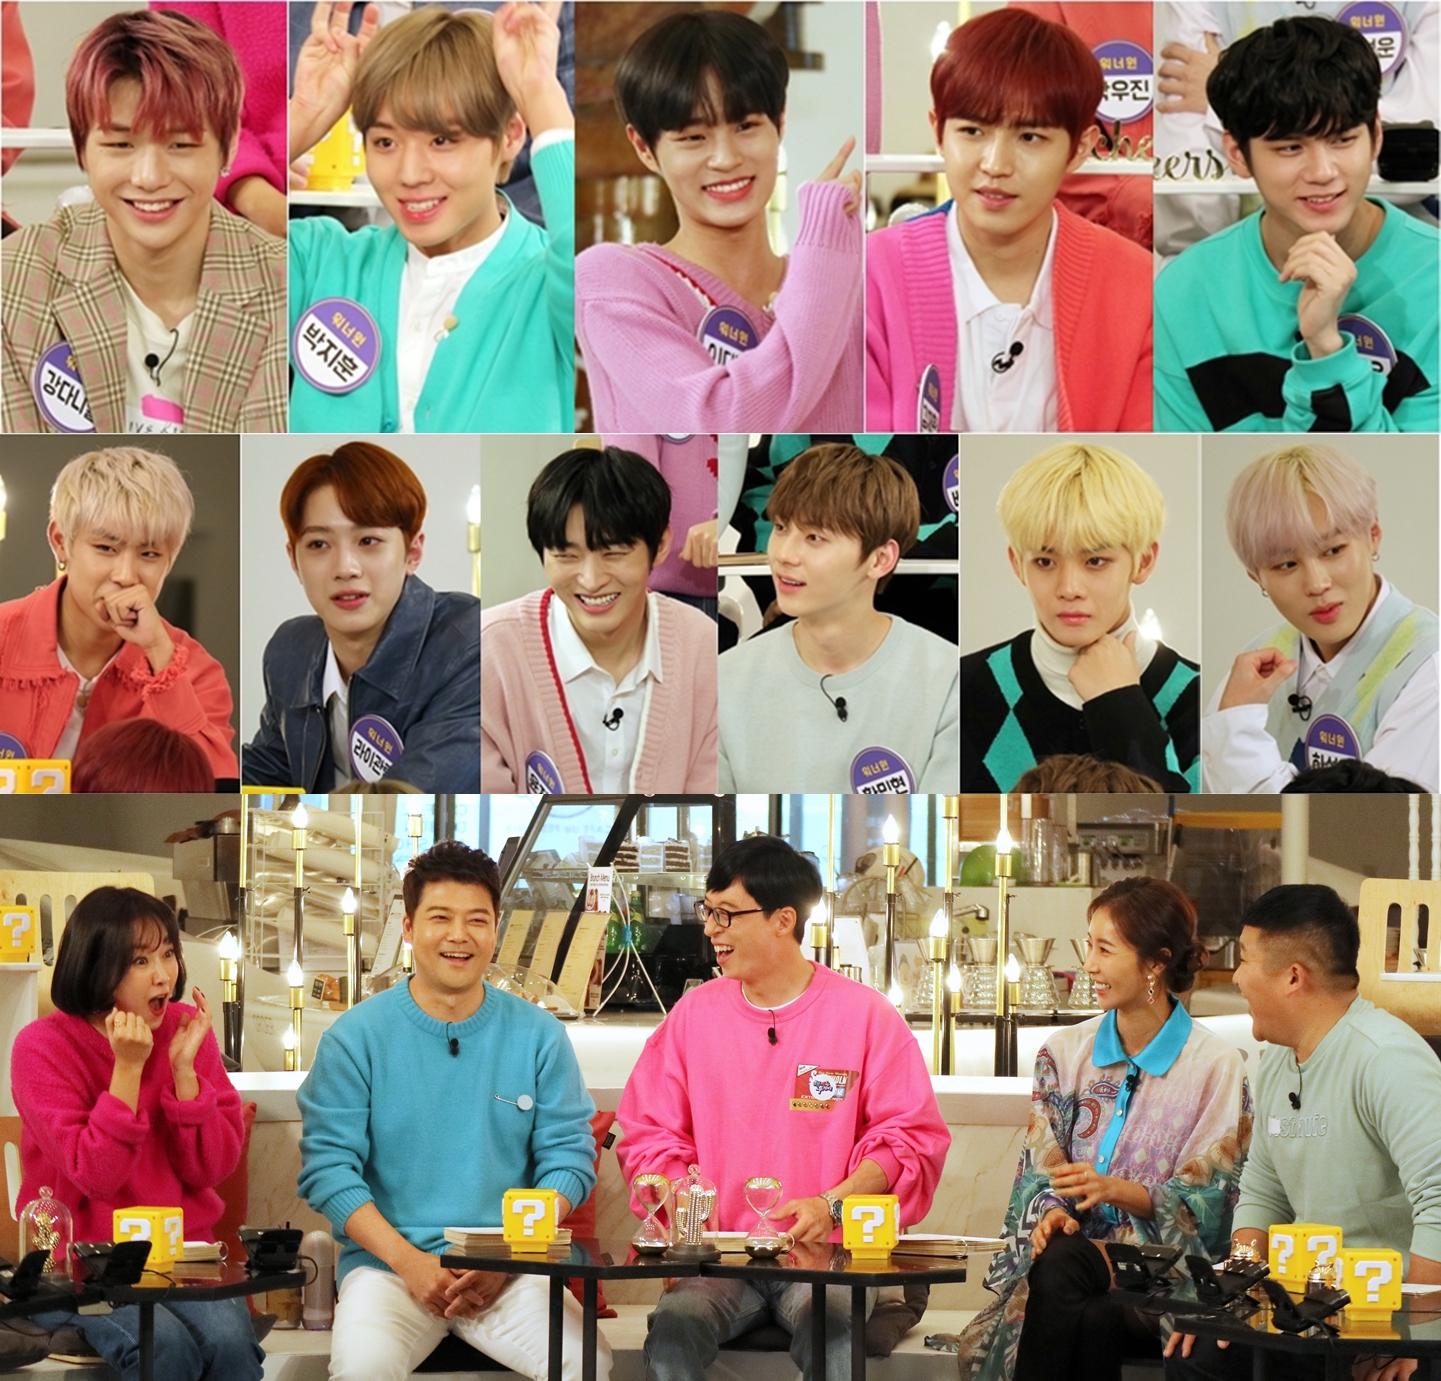 In Happy Together 4, Wanna One Kang Daniel explodes his unfavorable desire for entertainment and shows off his talk skills.KBS 2TV Happy Together 4 (hereinafter referred to as Hattoo 4) will be broadcast on the 15th as Wanna One Special, which is a feature of Wanna One complete.On the day of the show, Special MC Han Eun-jung - Kim Ji-hye and other performing arts Idol Wanna One will appear and throw a laughing nuclear bomb at the house theater on Thursday night.In a recent recording, Kang Daniel confessed to the desire for entertainment, which he had hidden, saying, I am greedy for broadcasting these days.He then said that he had a meeting with his friends for Episode, and I kept calling the artist every time Episode came up, he said, showing off the aspect of Episode obsession.In addition, Rygwanrin, who had taken out the Episode without hesitation, said, If Yoo Jae-seok wants to talk about five more Episodes, he said.On the other hand, Yoon Ji-sung said, I was in Busan on the day Hwang Min-hyun played Haitu 4 Special MC.Yoon Ji-sung said, Wanna One is busy, but I am not busy. Call me anytime.Wanna One, who made headlines with her full appearance on the same day, is the back door of the talk box end king who has been shaking off all of his meetings.Also, it is said that the laughter has not ceased due to the artistic sense of those who have confided in their souls, such as a godly dance showdown that predicts uninterrupted talk and rare work, raising expectations vertically in Happy Together 4 - Wanna One special.KBS 2TV Happy Together 4 will be broadcast at 11:10 pm on the 15th (Thursday) to feature the Wanna One-vote Torque box that can not be missed for a second.iMBC Kim Mi-jung  Photo KBS